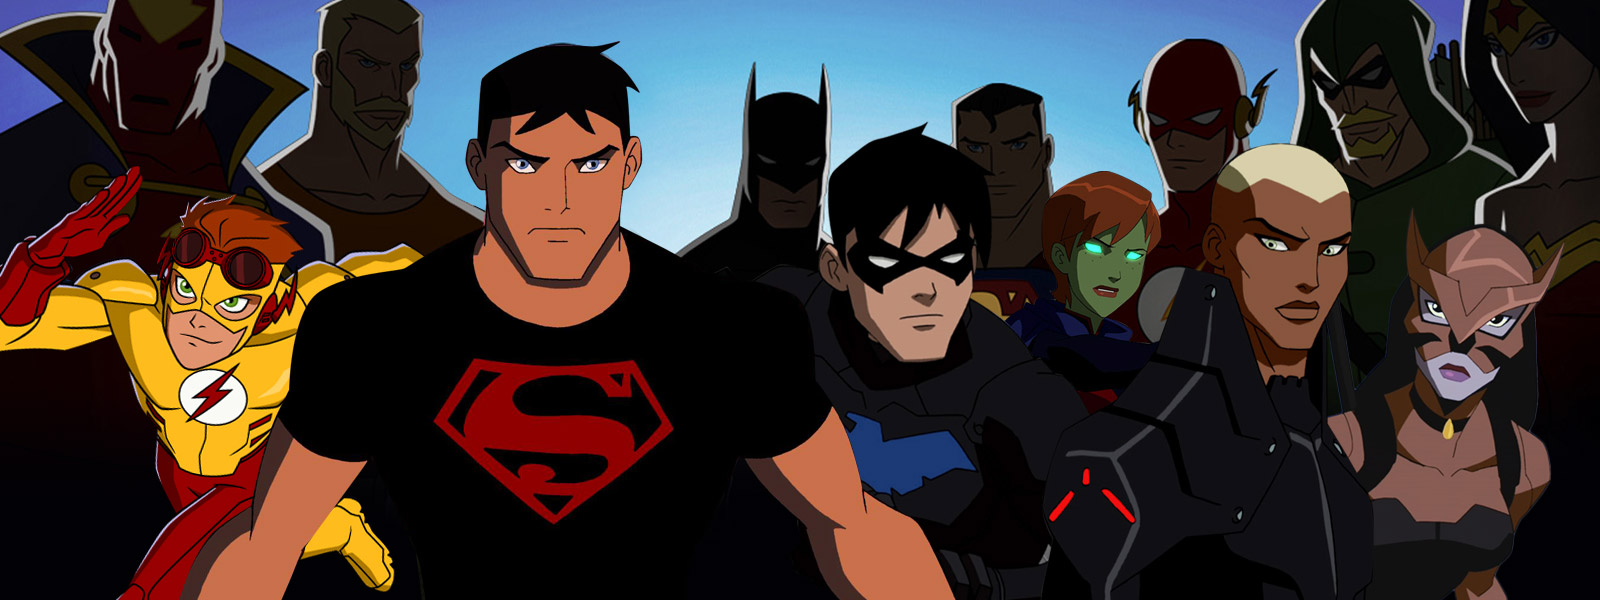 youngjustice_031513_1600.jpg